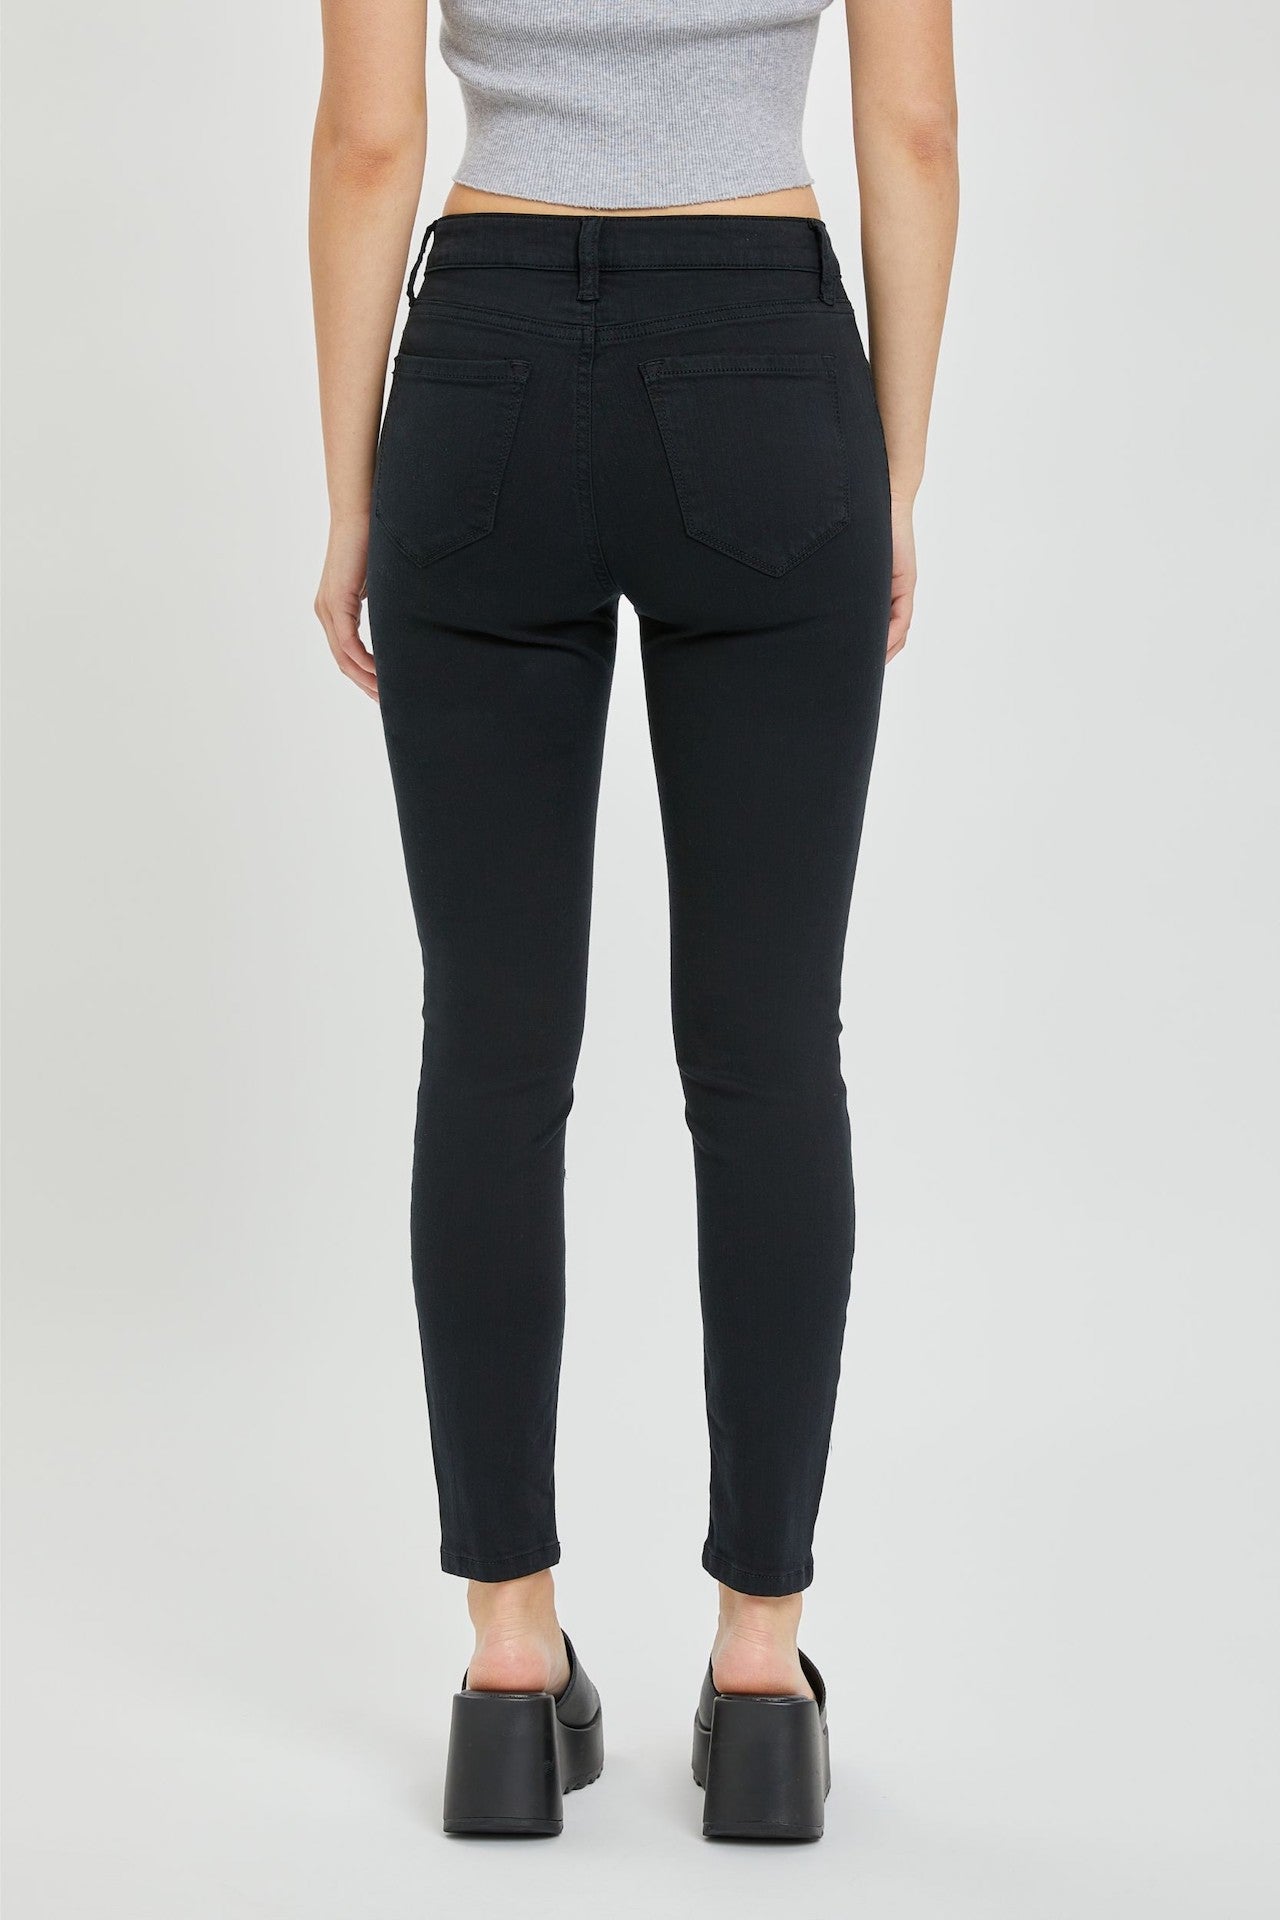 black mid rise cropped skinny jeans